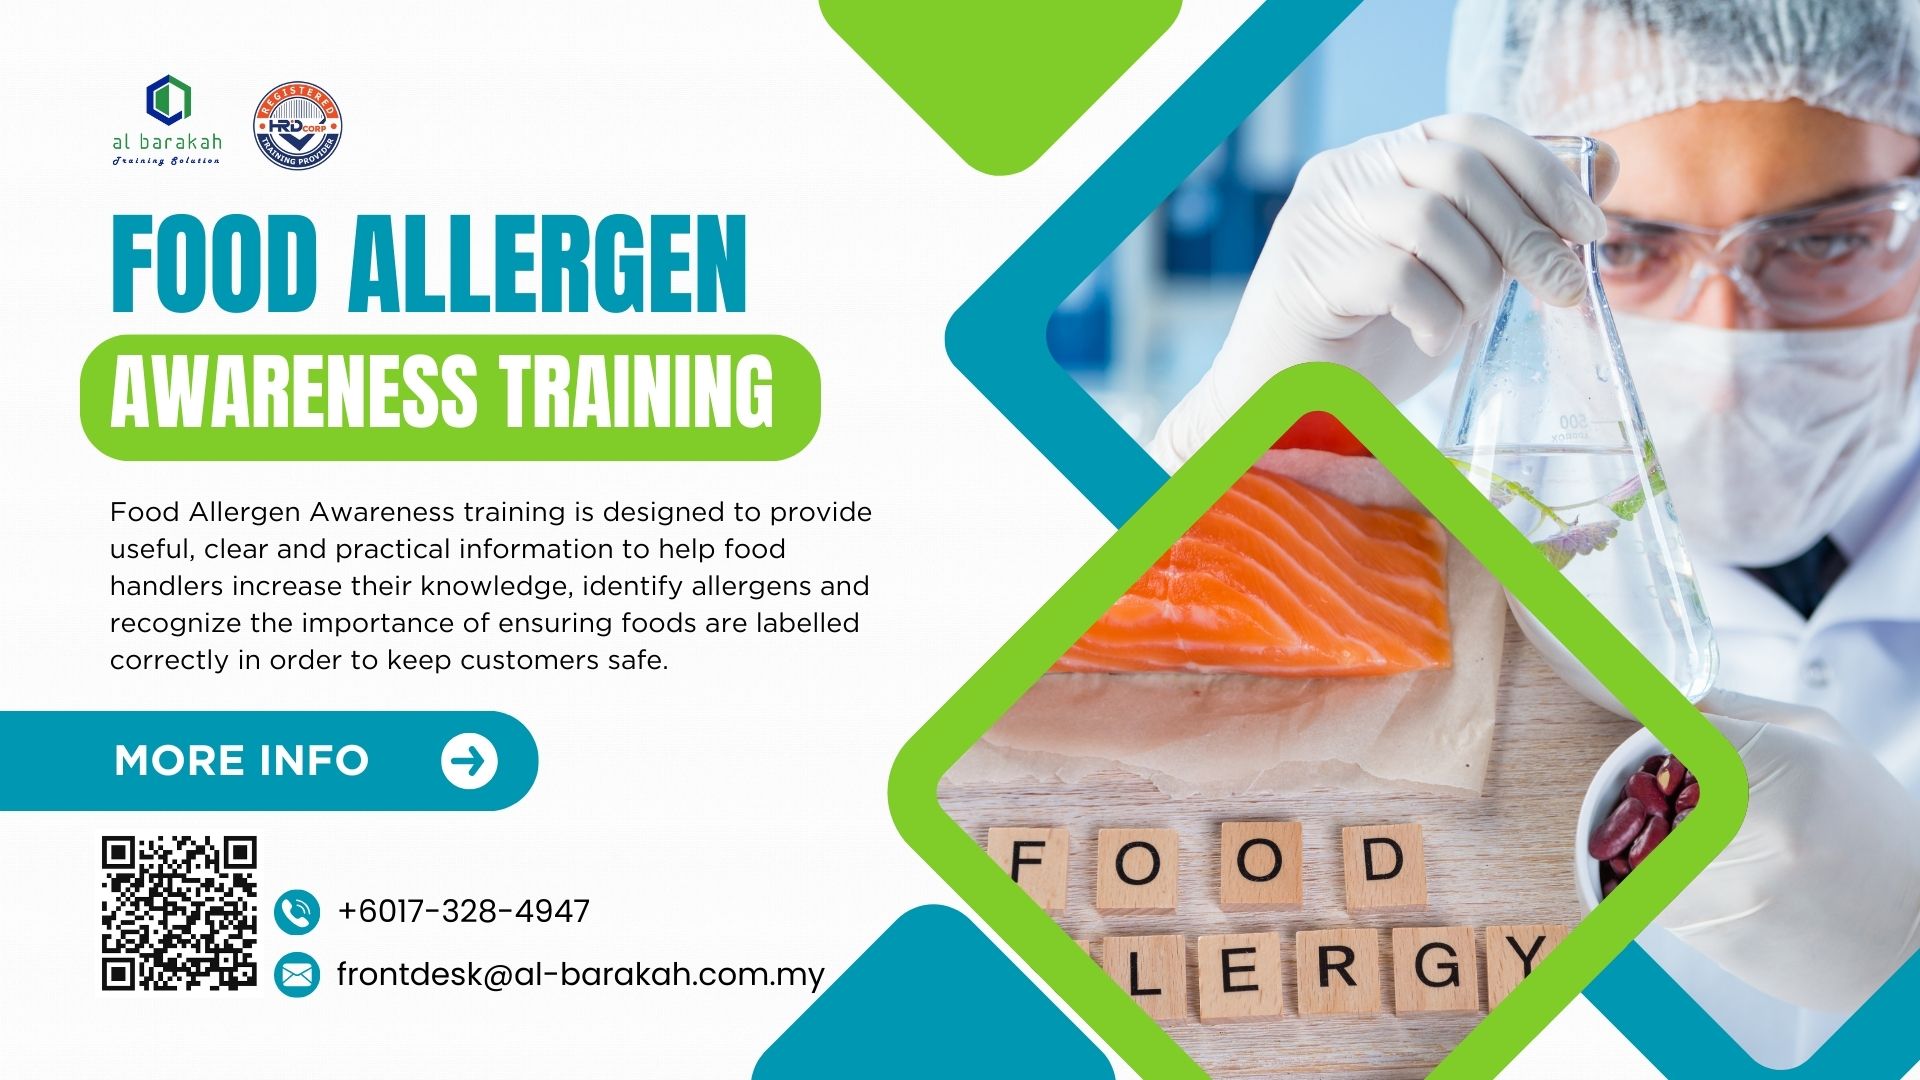 Food Allergen Awareness Training HRDCorp Claimable